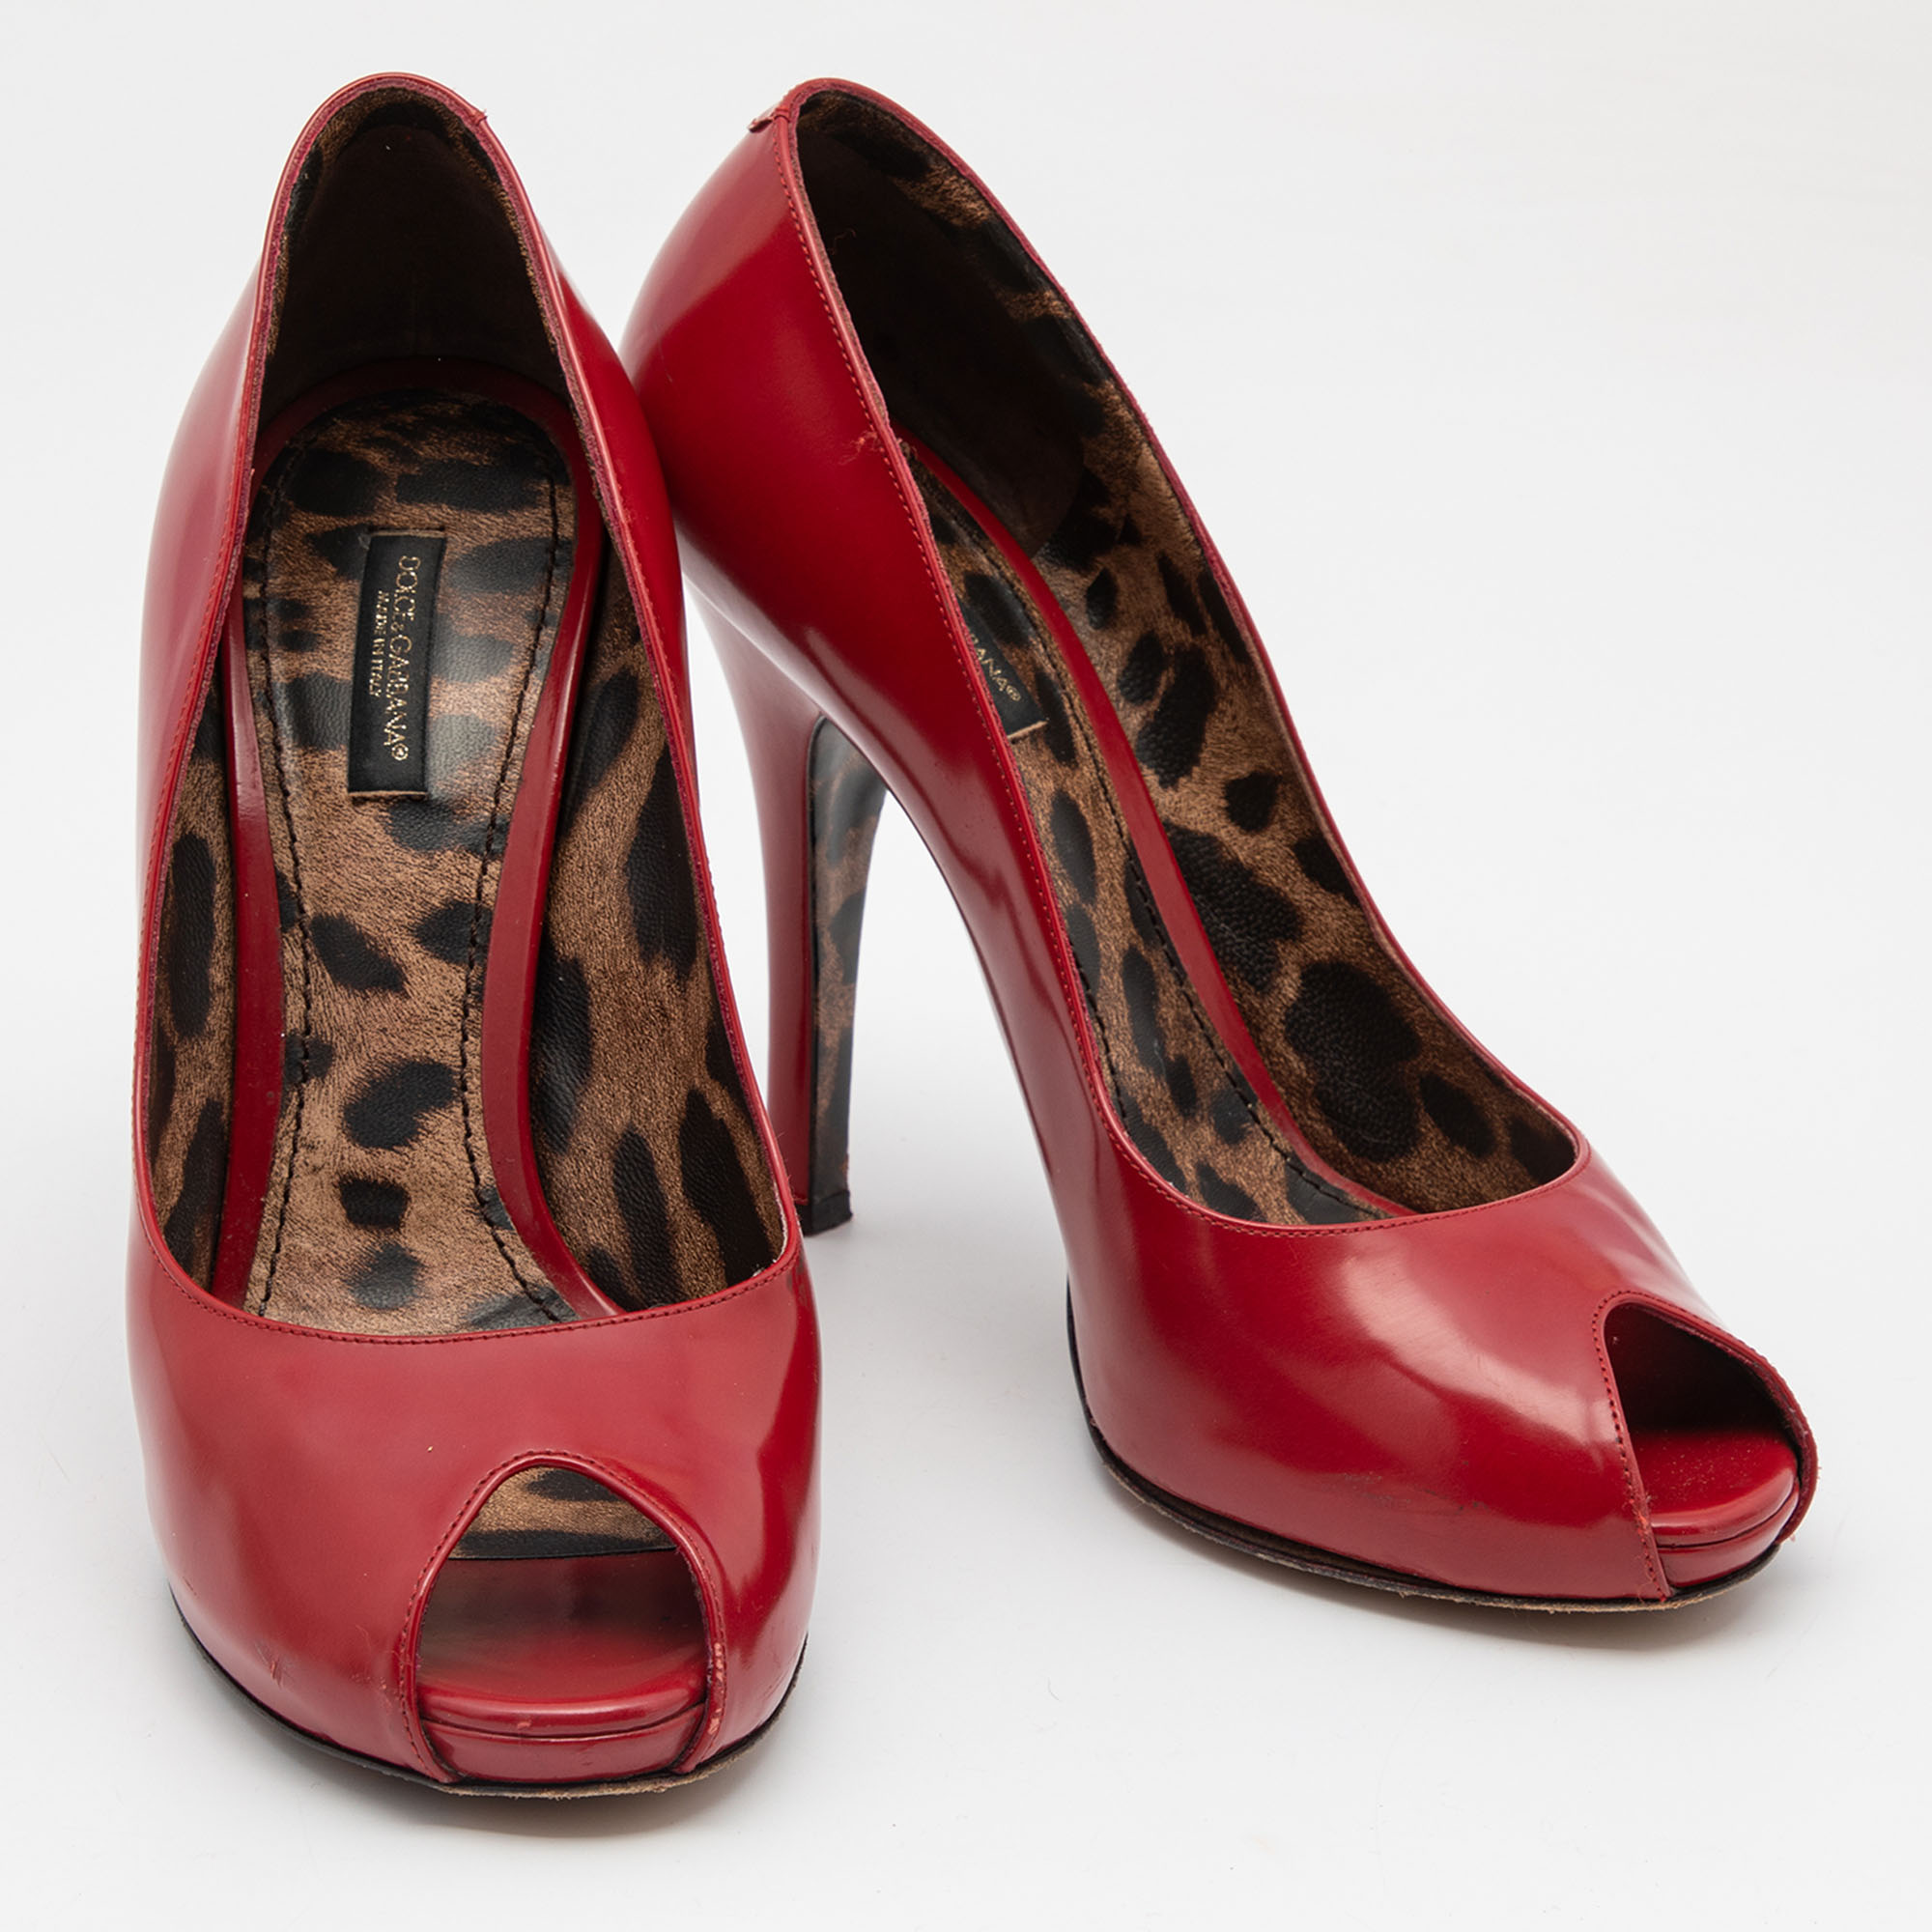 Dolce & Gabbana Red Glossy Leather Peep Toe Pumps Size 39